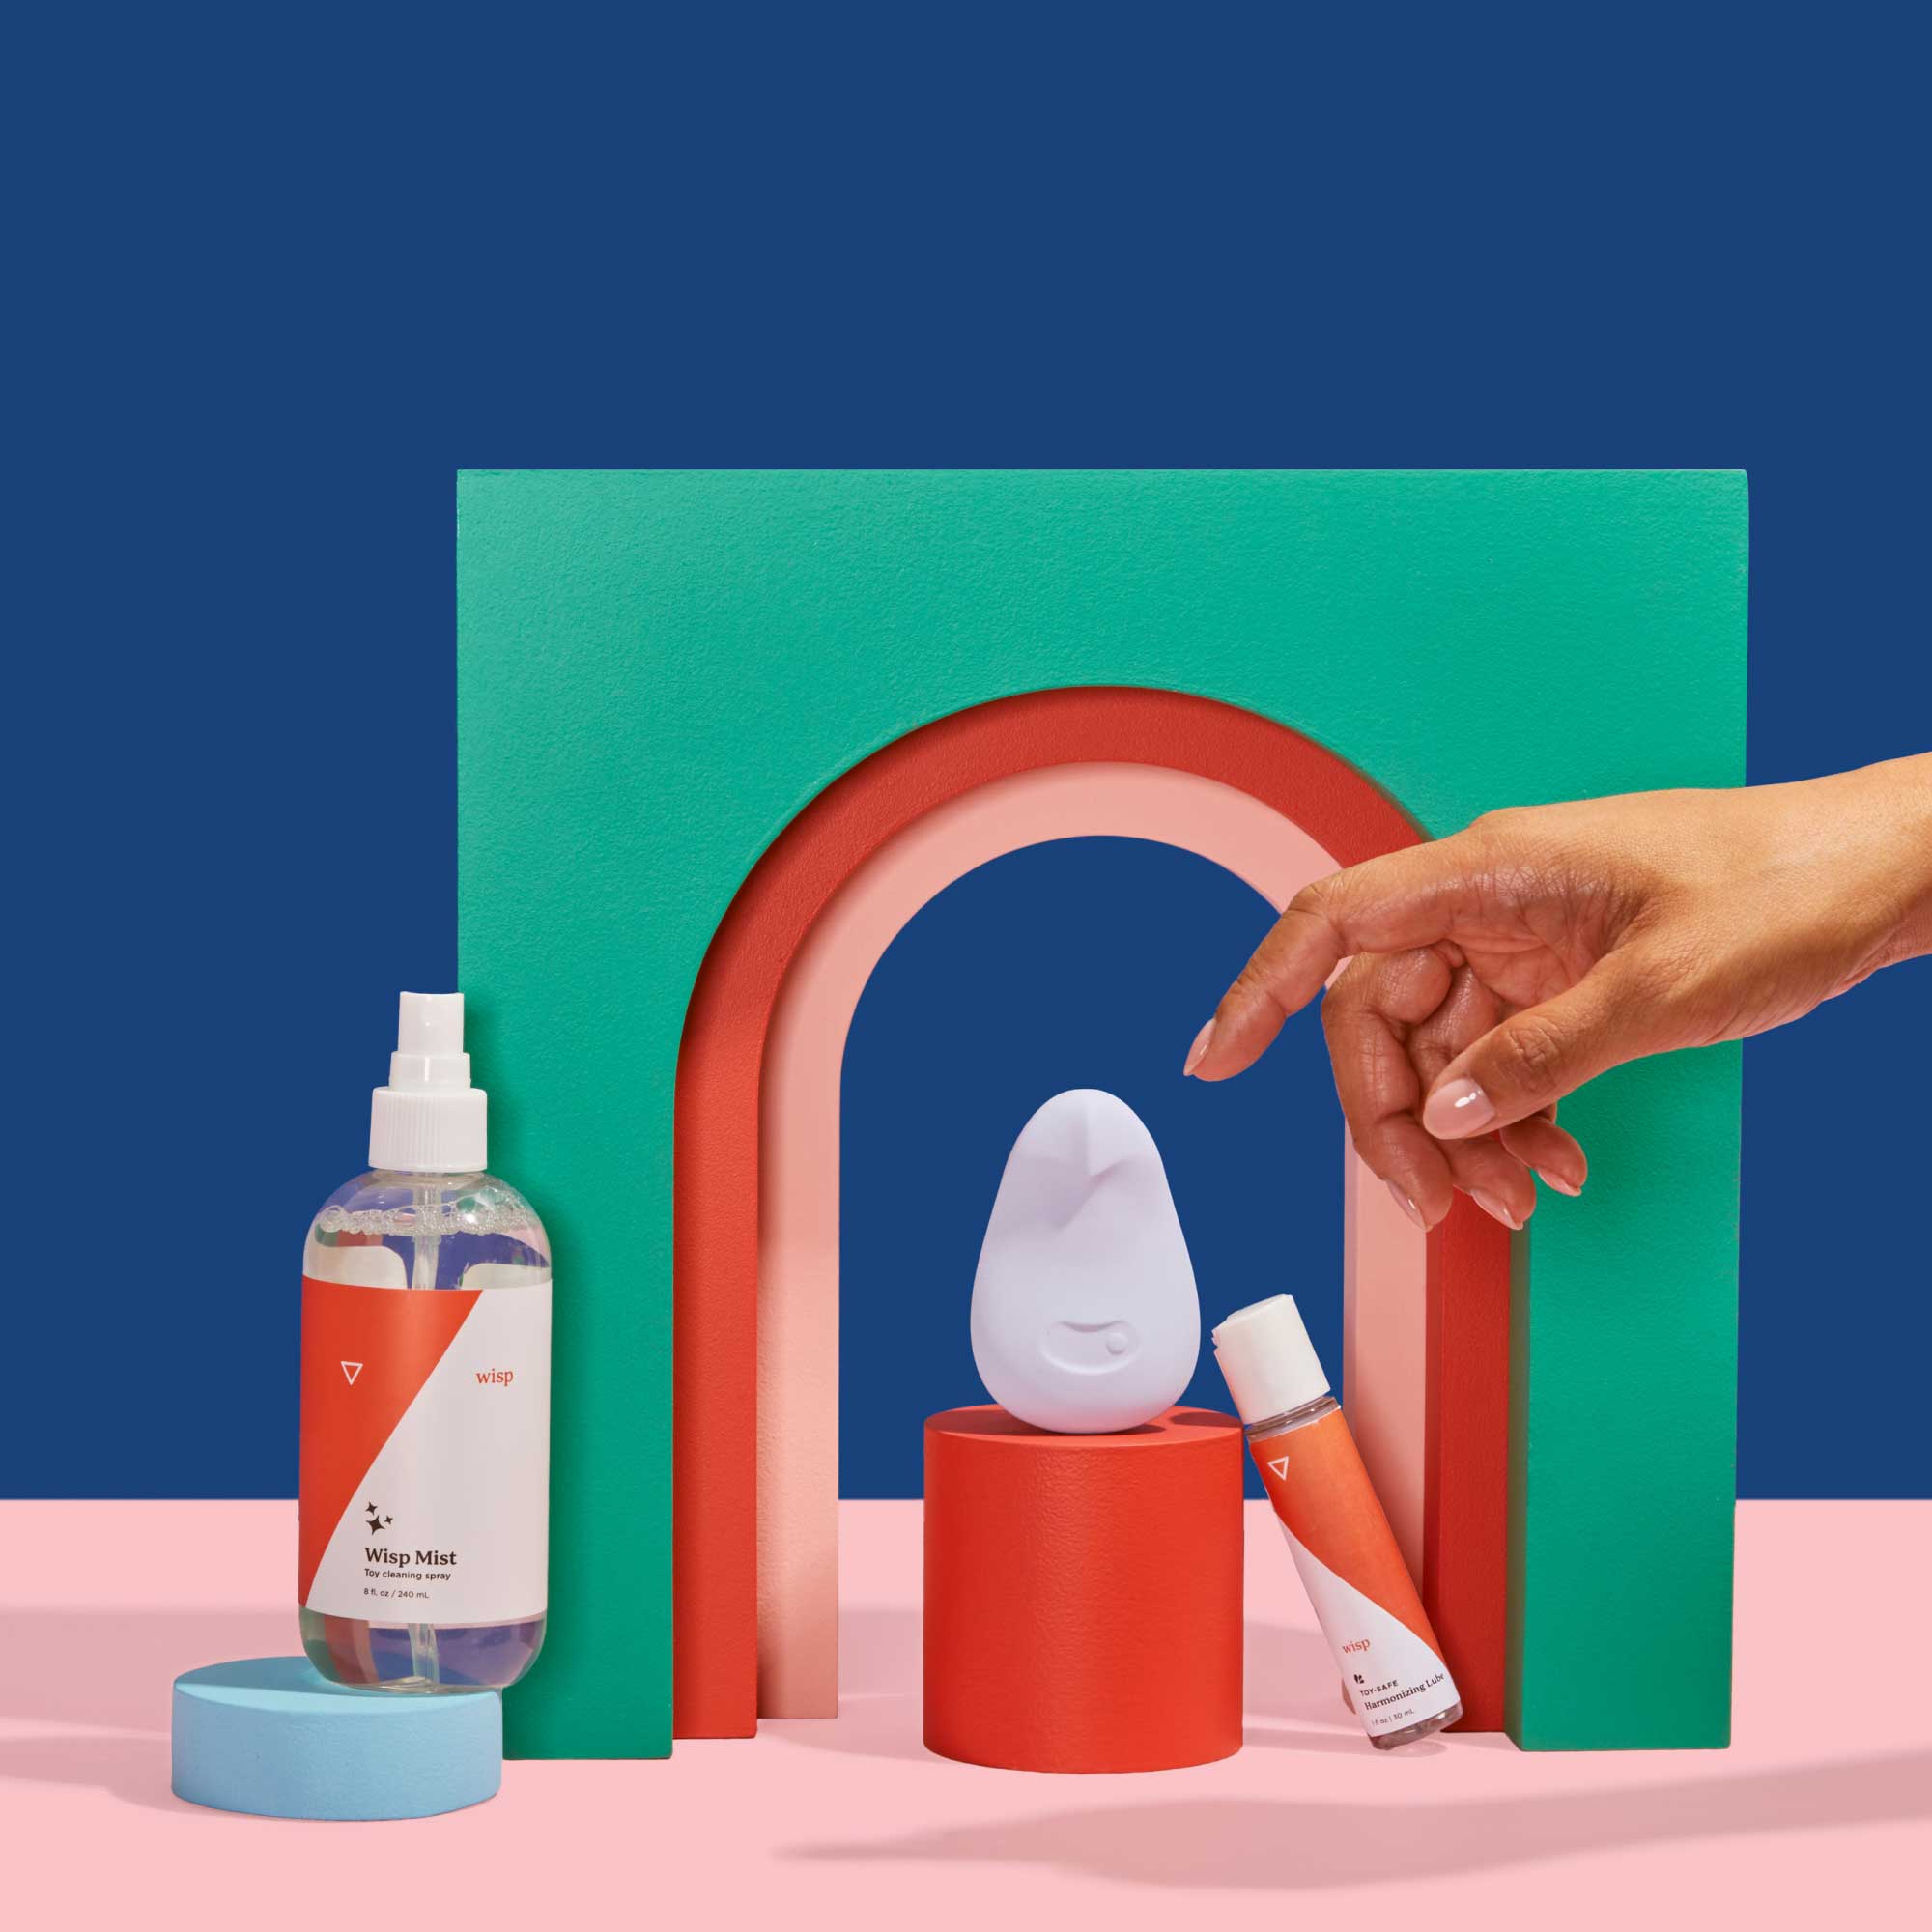 Woman's hand reaching for Pom by Dame, Wisp Mist, and Toy-Safe Lube with colorful abstract shapes on a blue and pink background